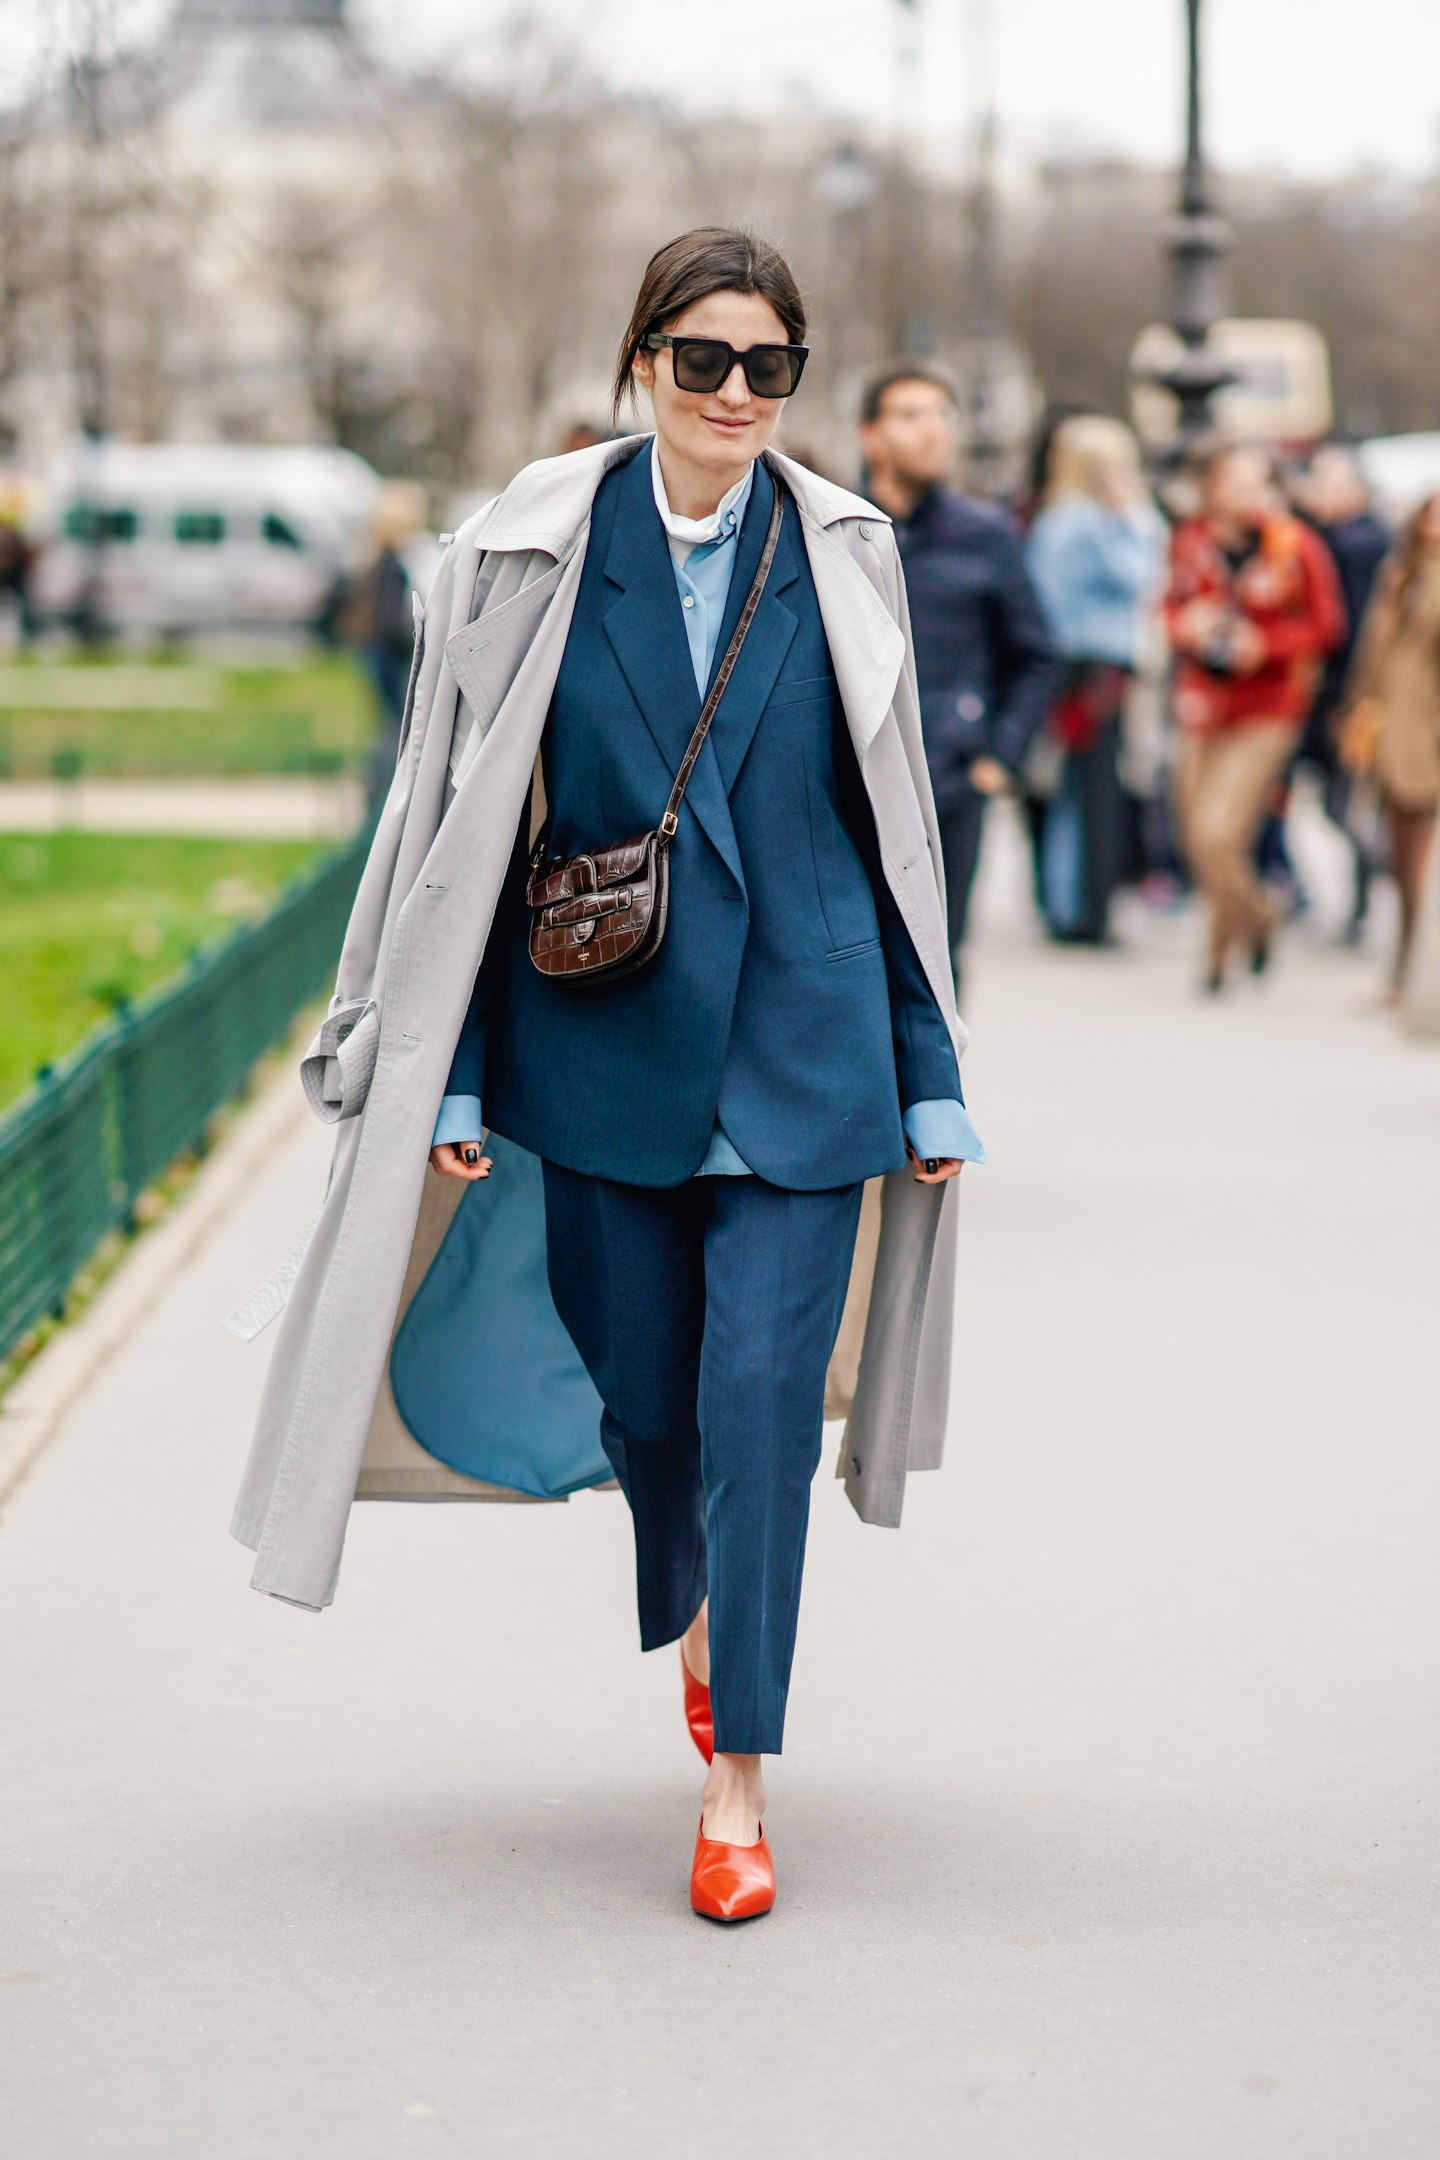 Trench coat layered over suit street style